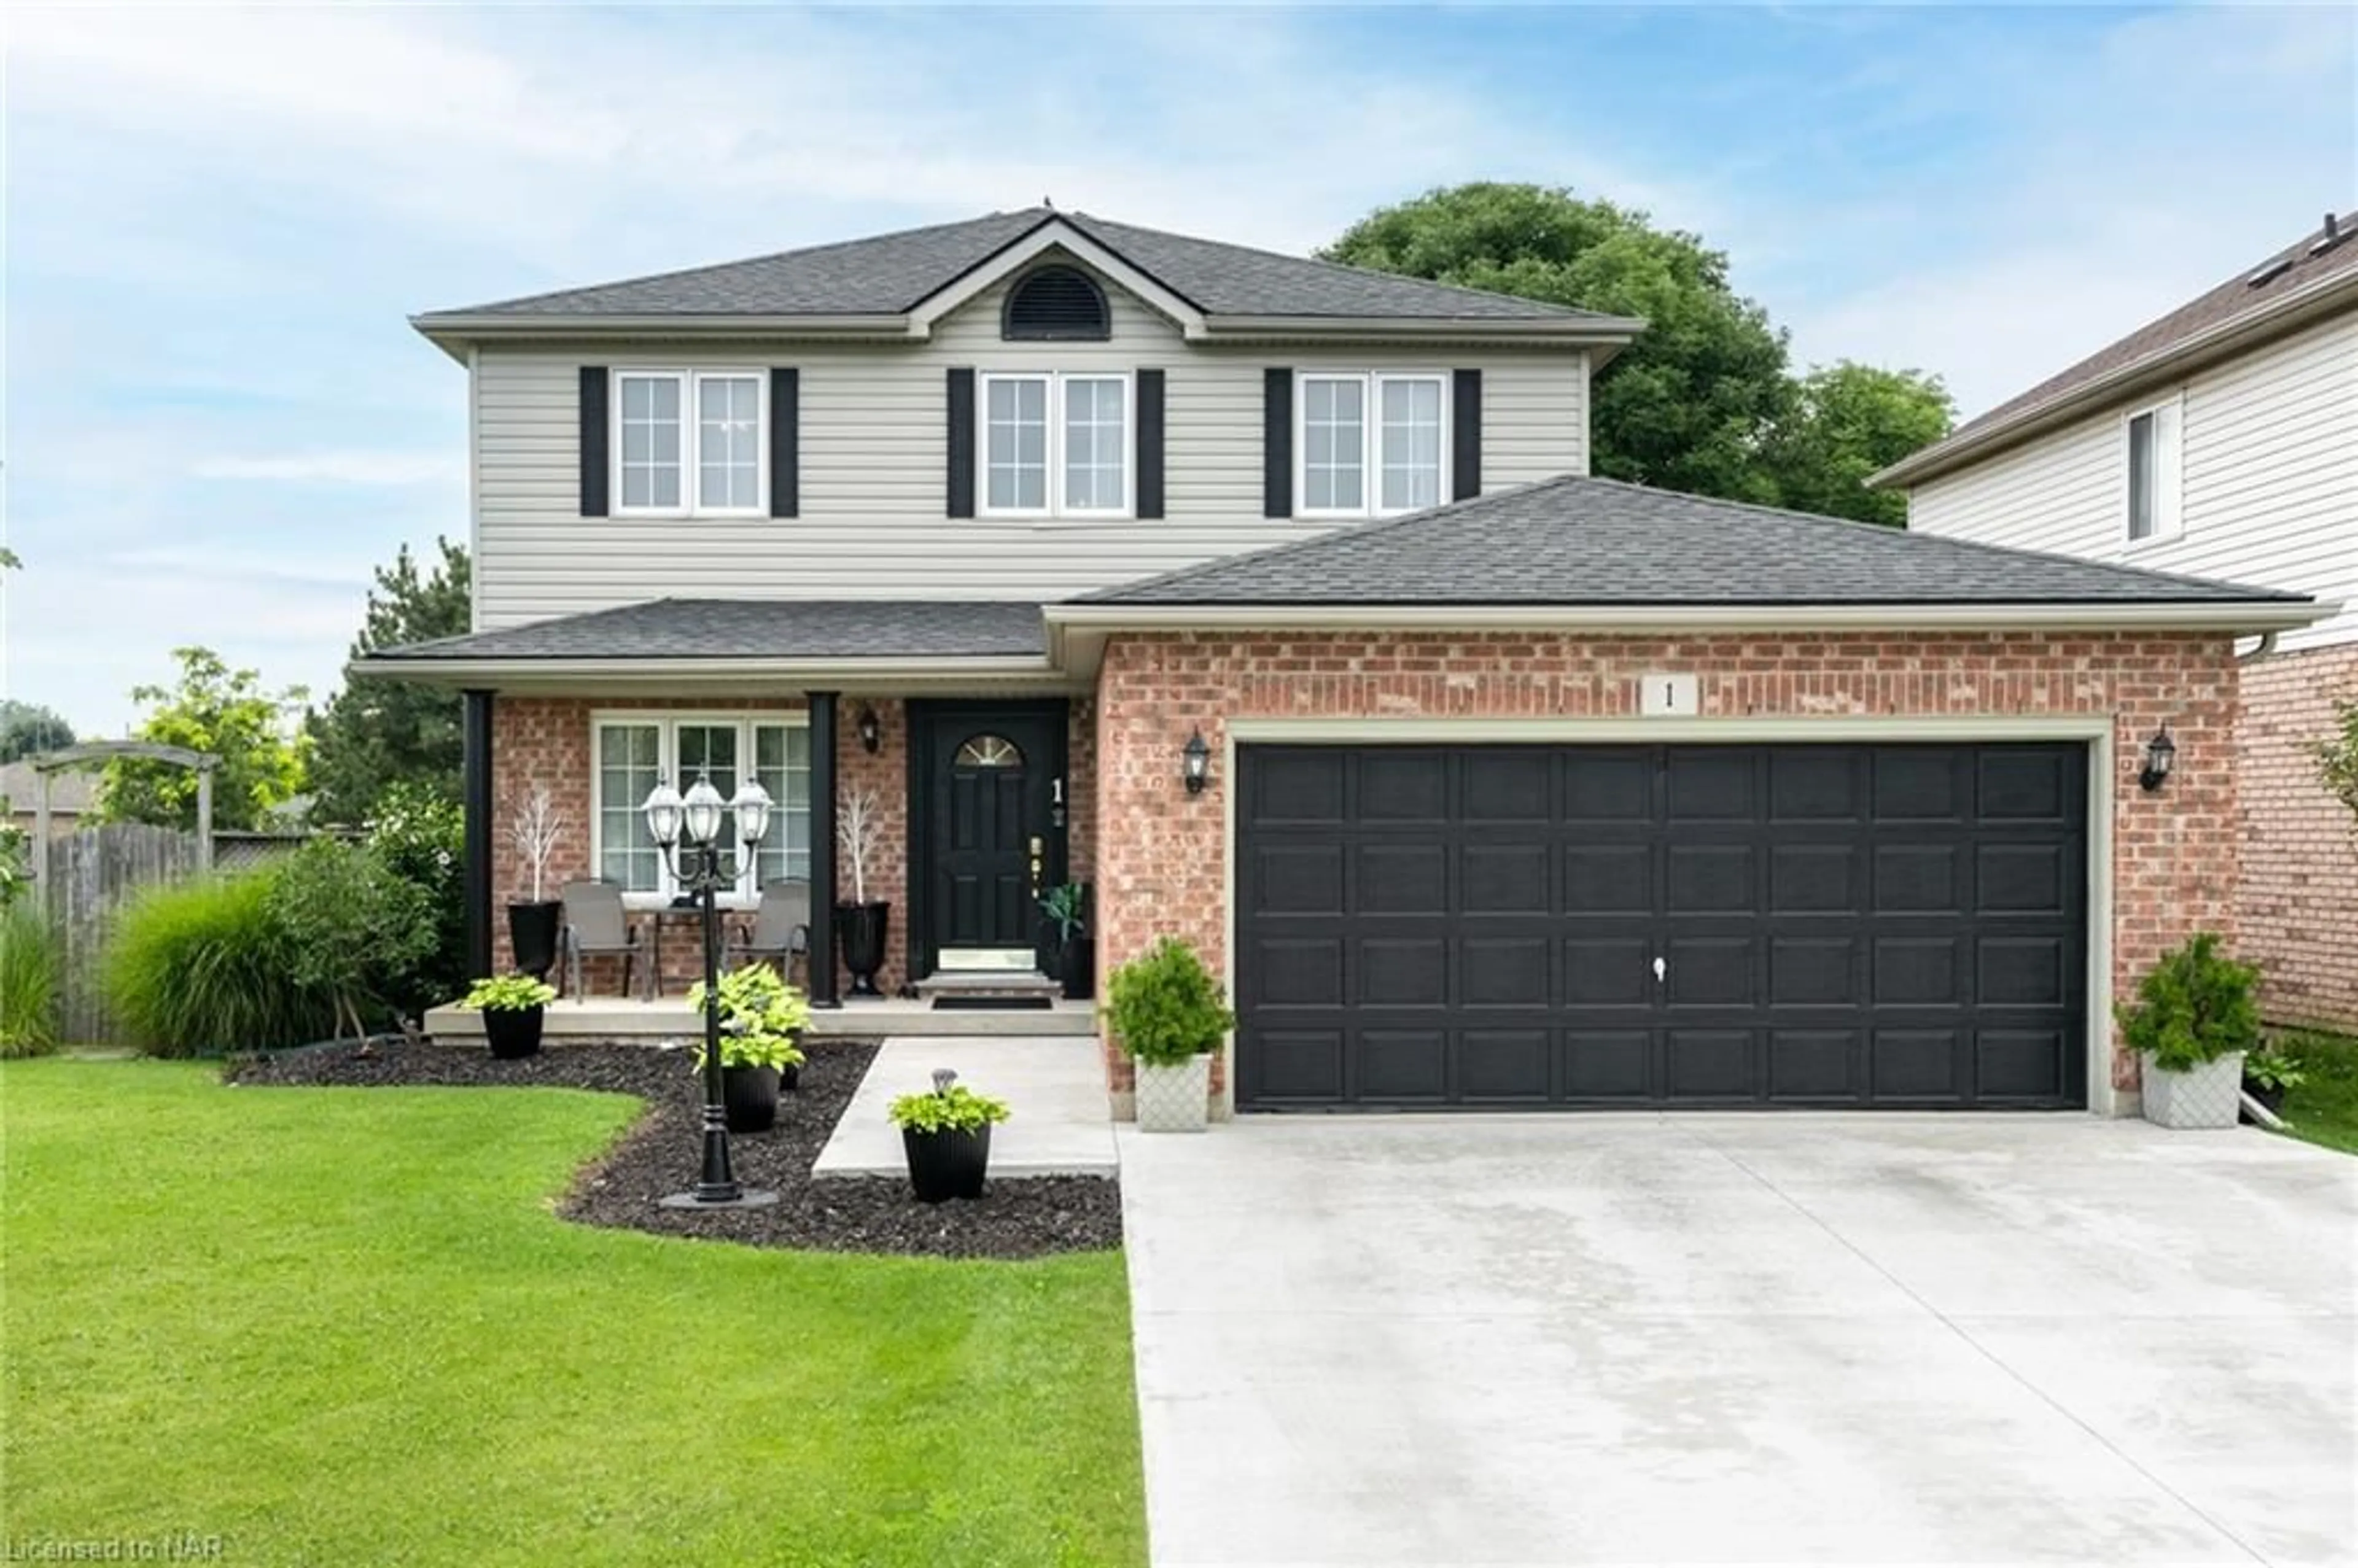 Home with brick exterior material for 1 Shaver Rd, St. Catharines Ontario L2S 3Z2